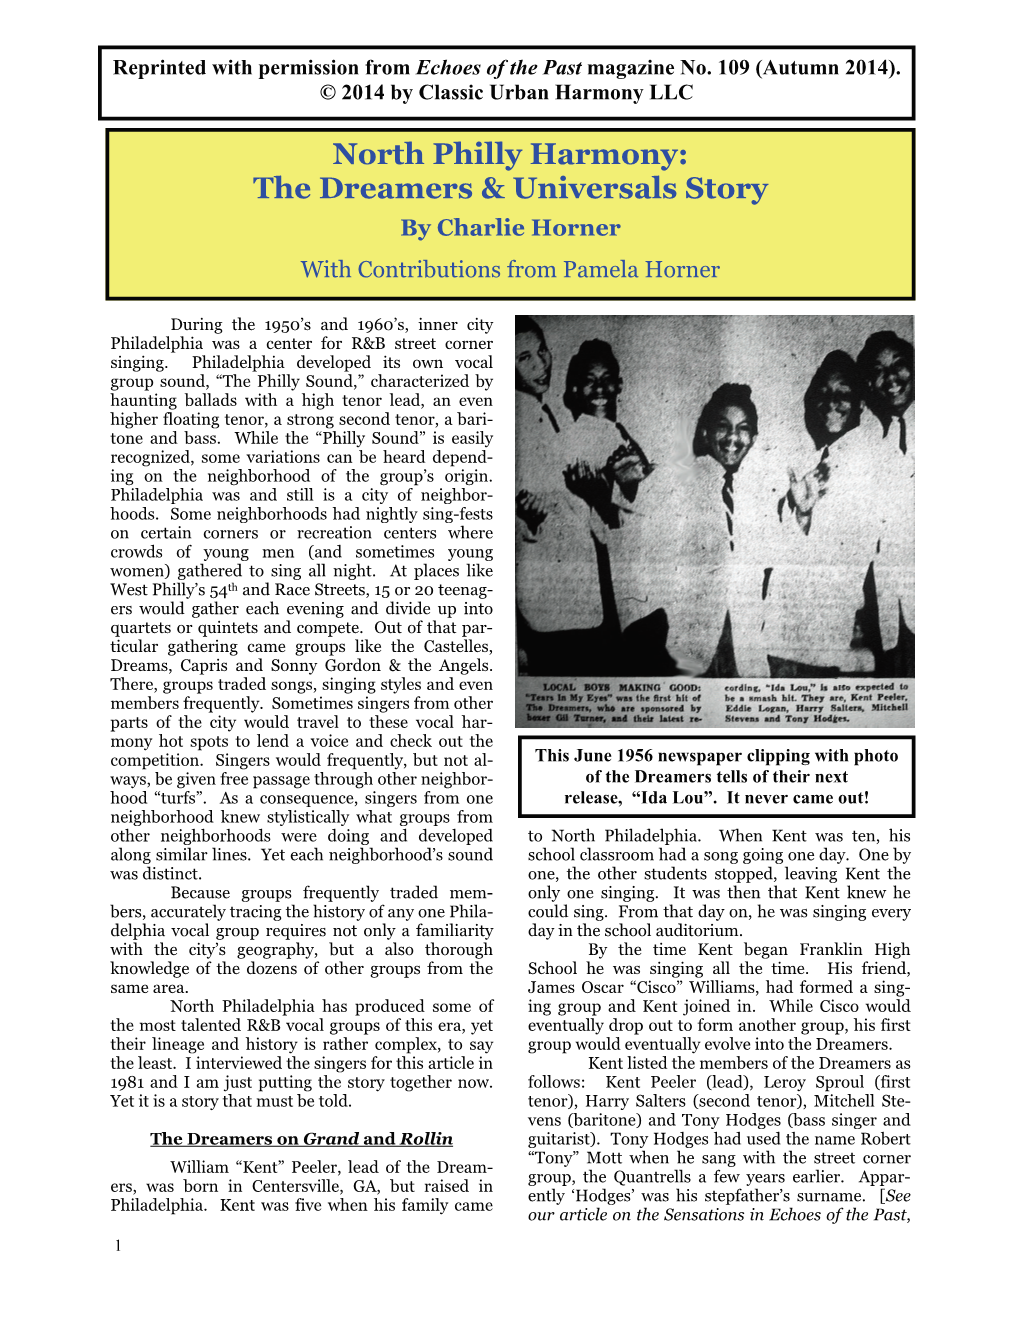 North Philly Harmony: the Dreamers & Universals Story